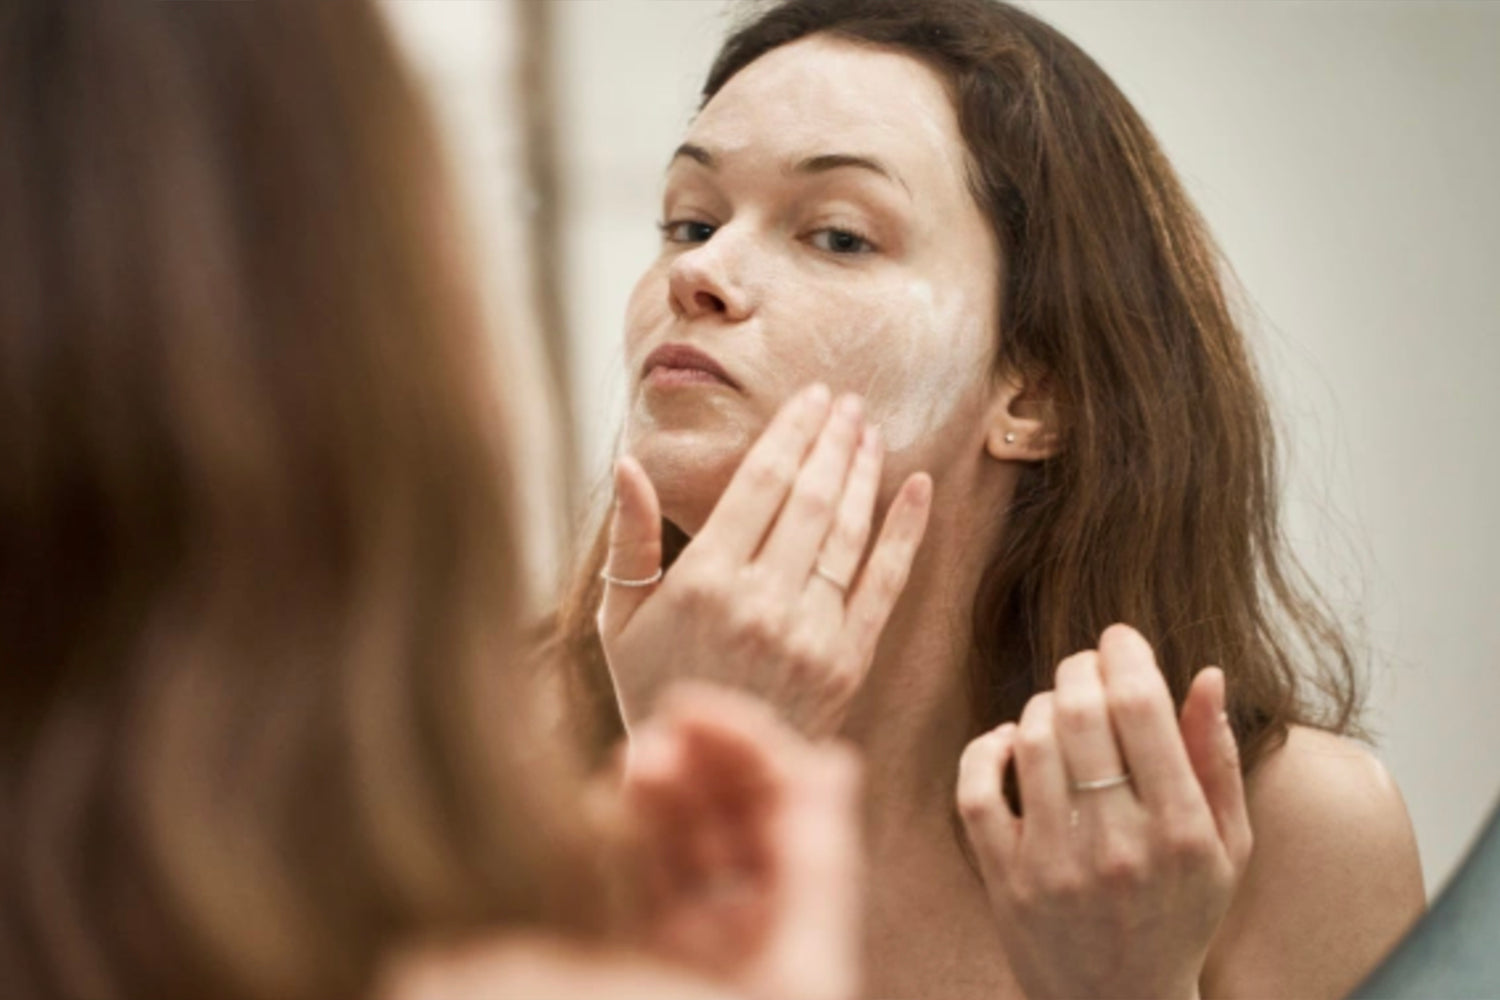 Confused About Your Skincare Routine Steps? Here’s the Right Order